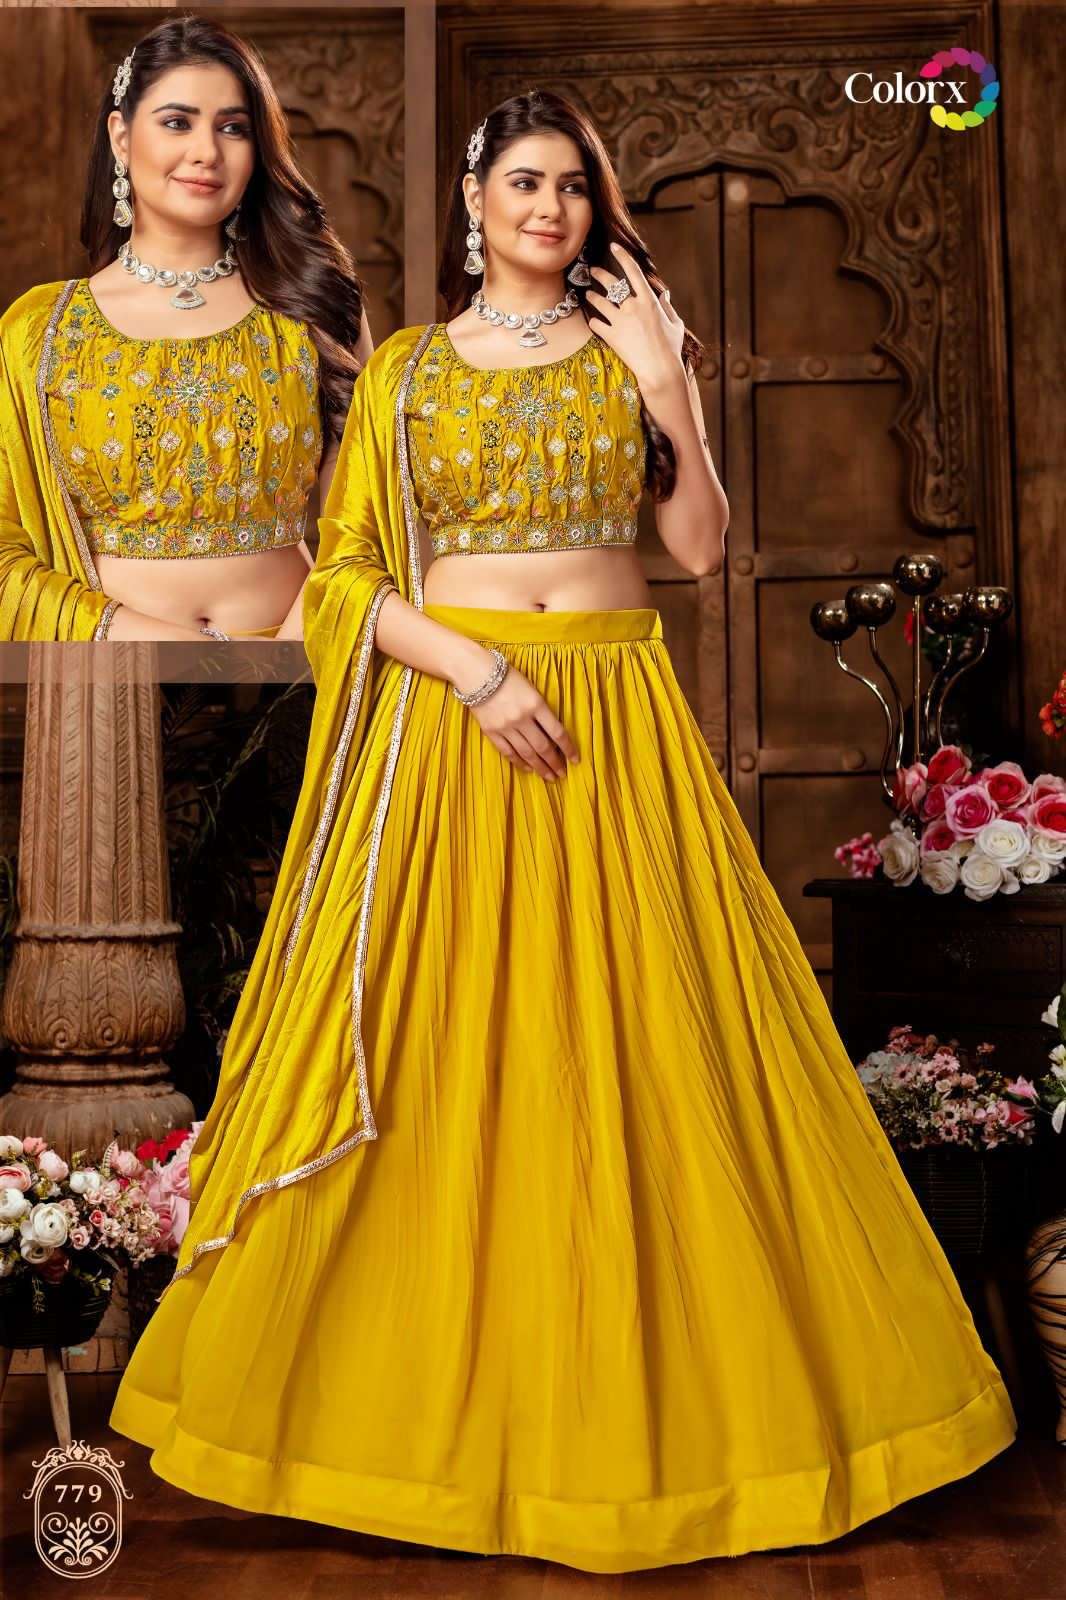 colorx 779-783 series readymade fancy lehenga with designer crop top with dupatta